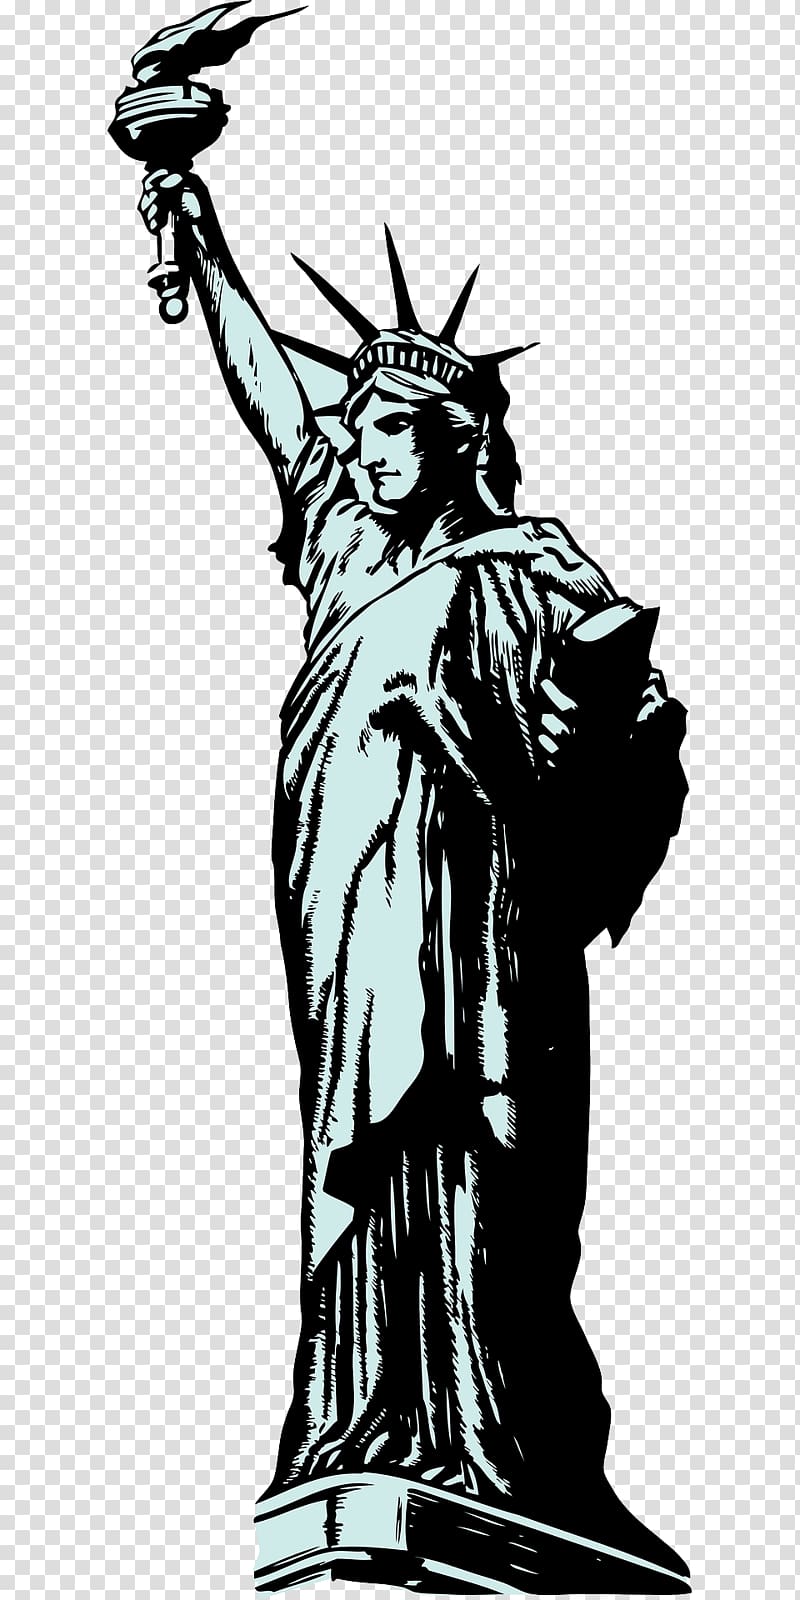 Statue of Liberty , The torch of the goddess transparent.